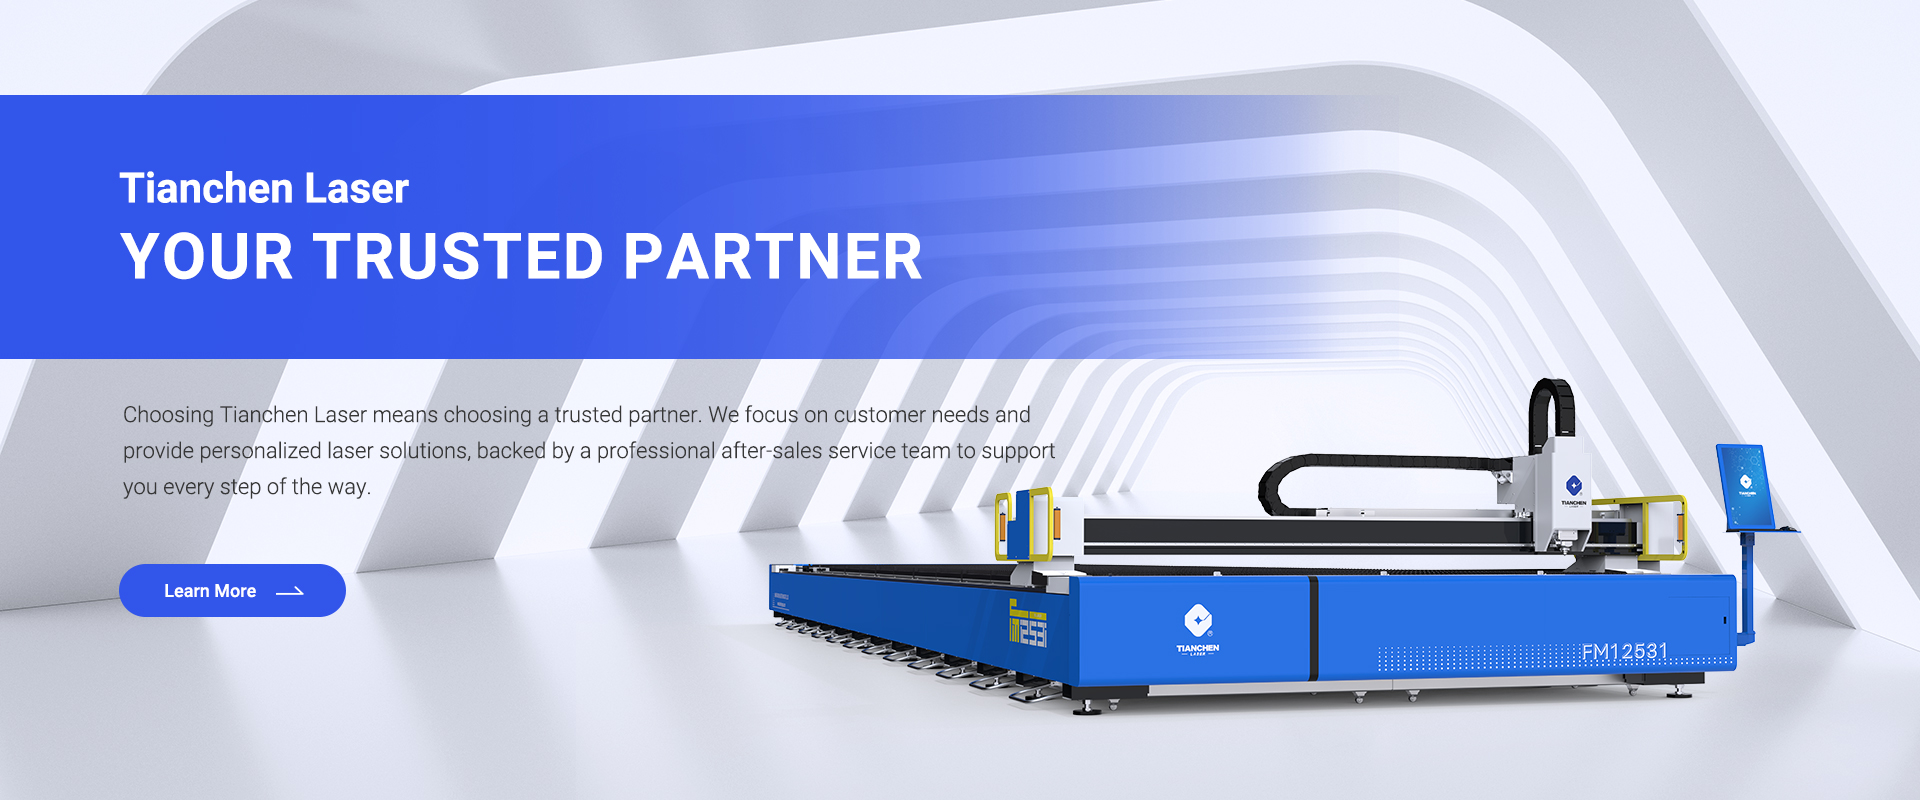 Fiber laser cutting machines have become an indispensable tool in modern industrial manufacturing, thanks to their high precision and fast cutting speed.